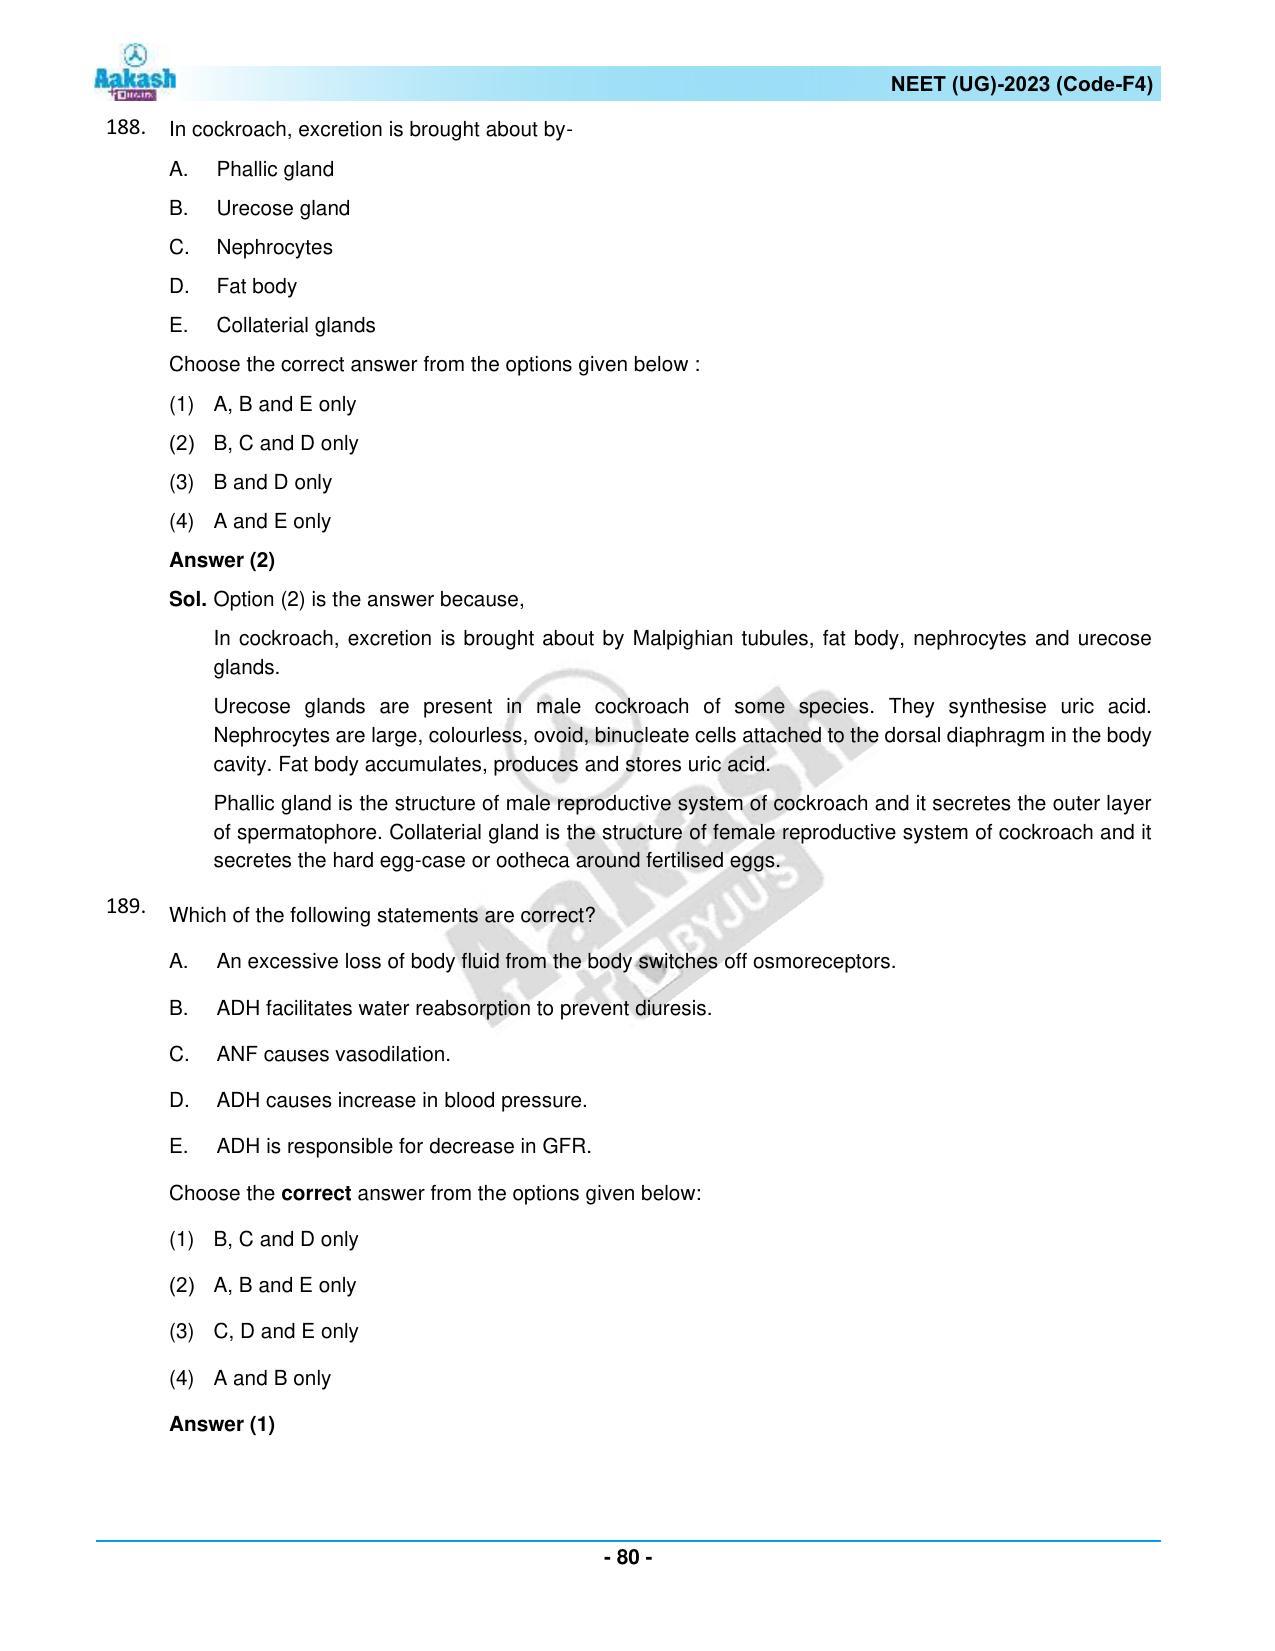 NEET 2023 Question Paper F4 - Page 80